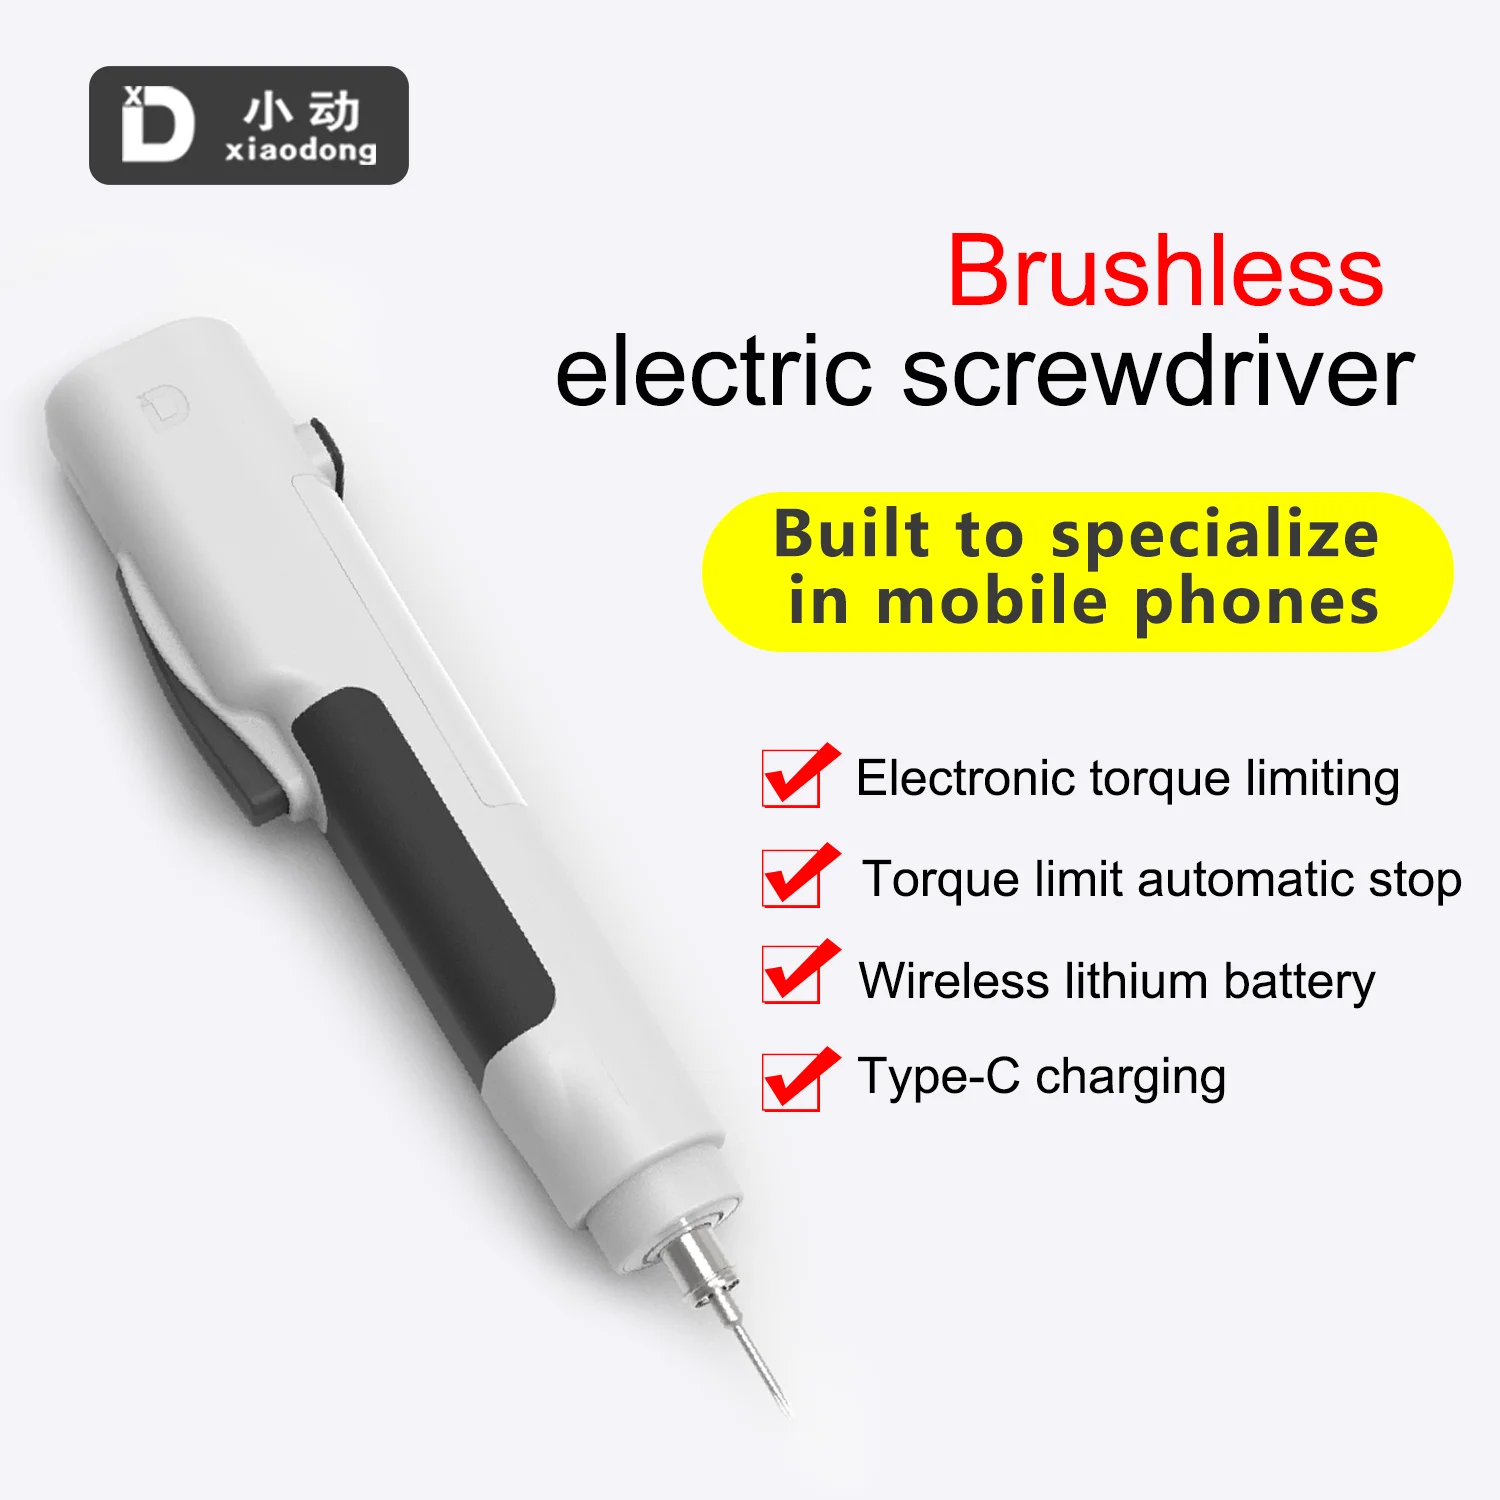 Xiaodong P1 Electric Screwdriver Professional Disassembly Tool for IPhone Android Huawei Phones Tablets Repair Opening Tools relife rl 087 3in1 high toughness disassembly set for iphone ipad samsung lcd screen pry opening phone repair tools